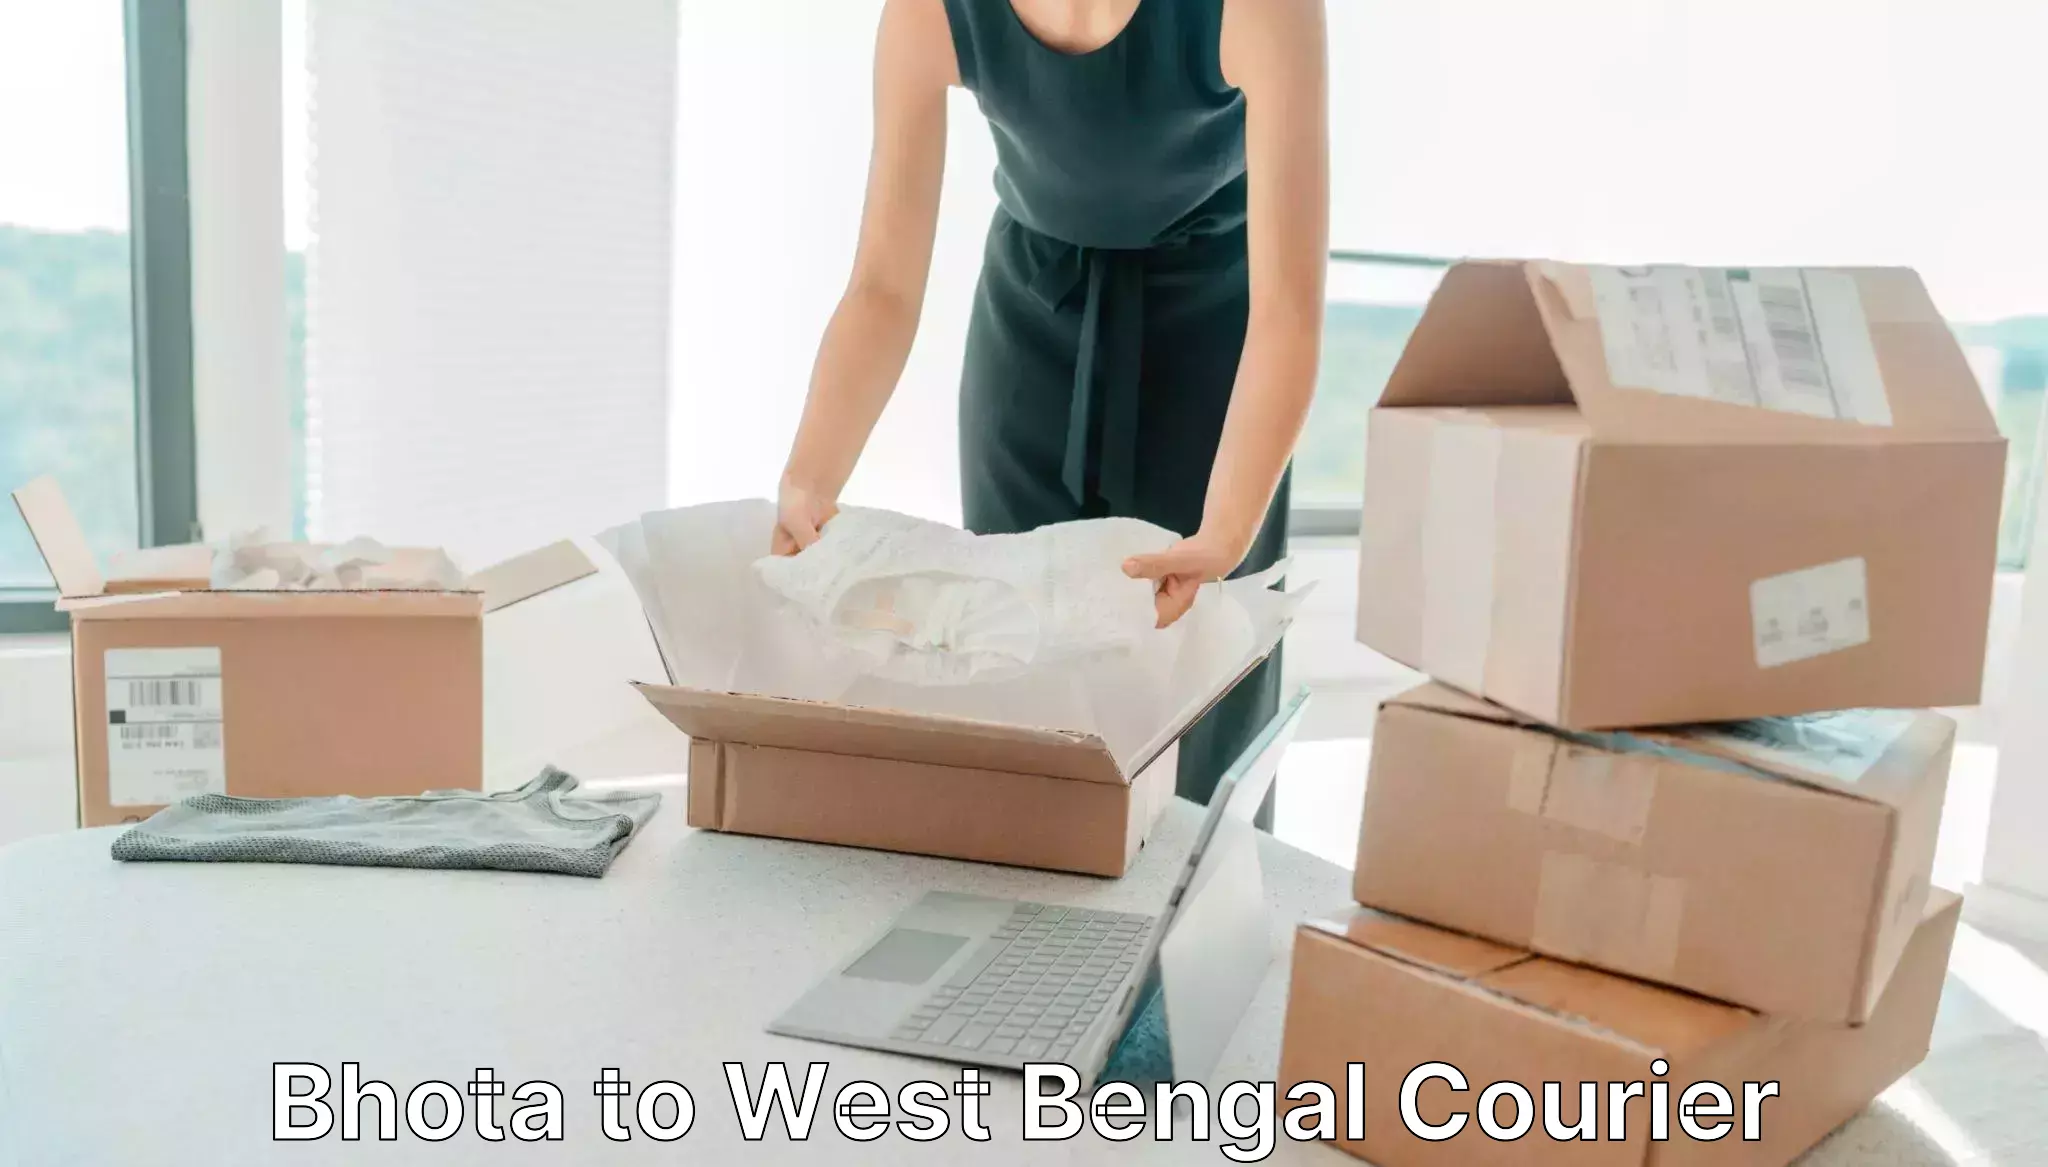 Automated shipping processes in Bhota to West Bengal